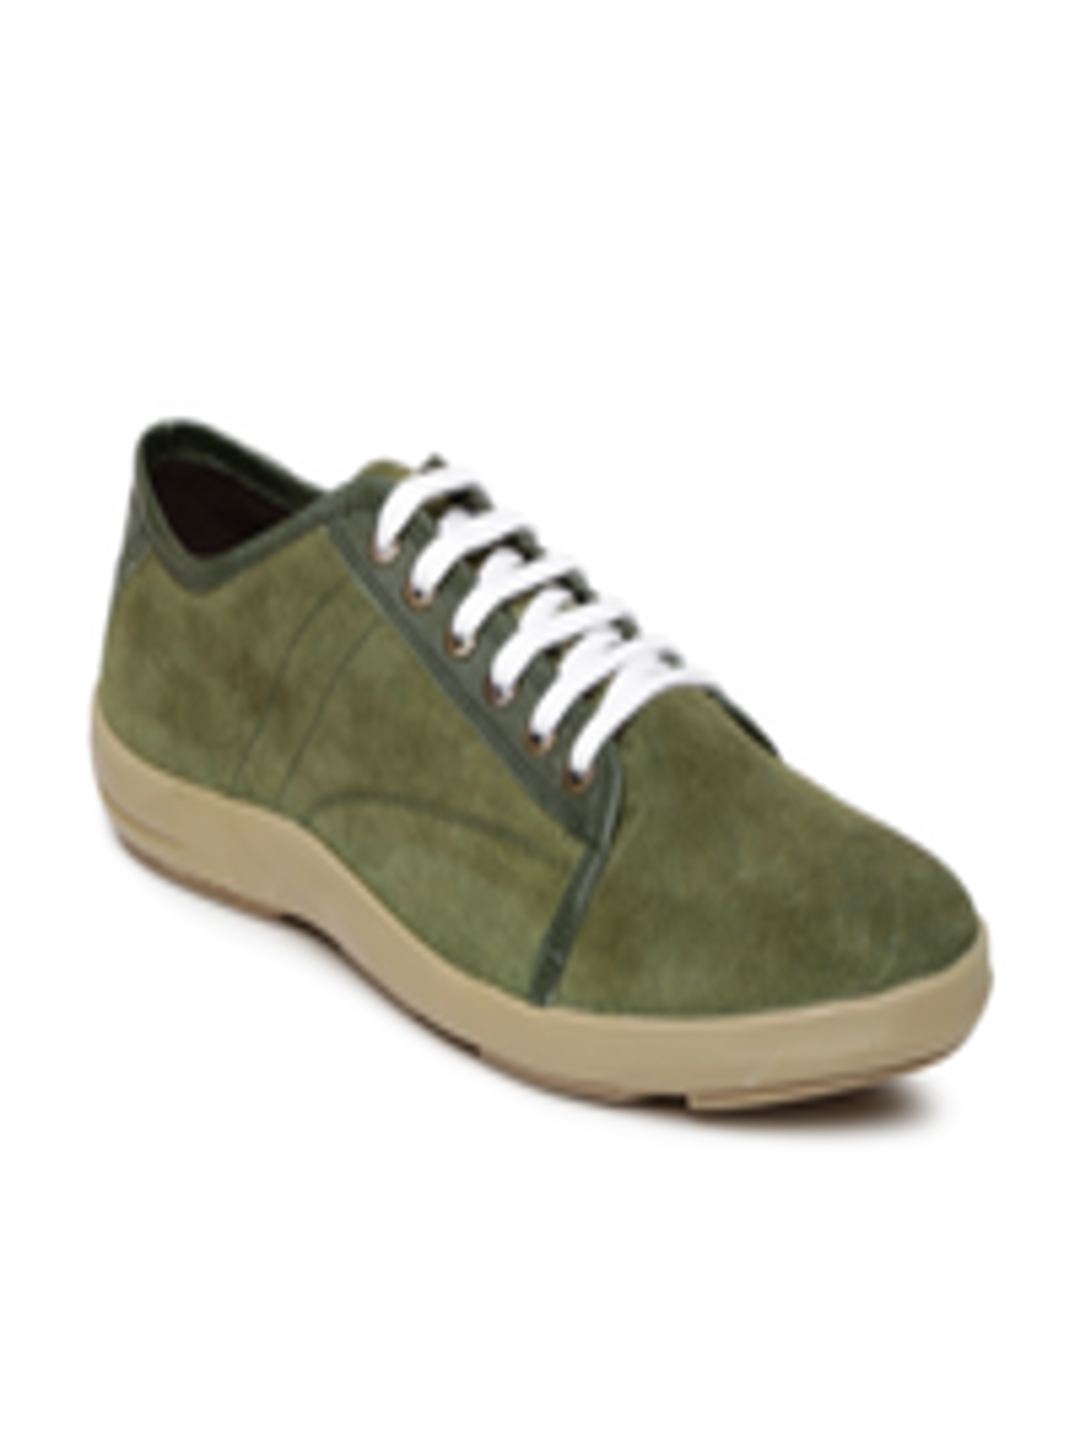 Buy Roadster Men Olive Green Suede Casual Shoes Casual